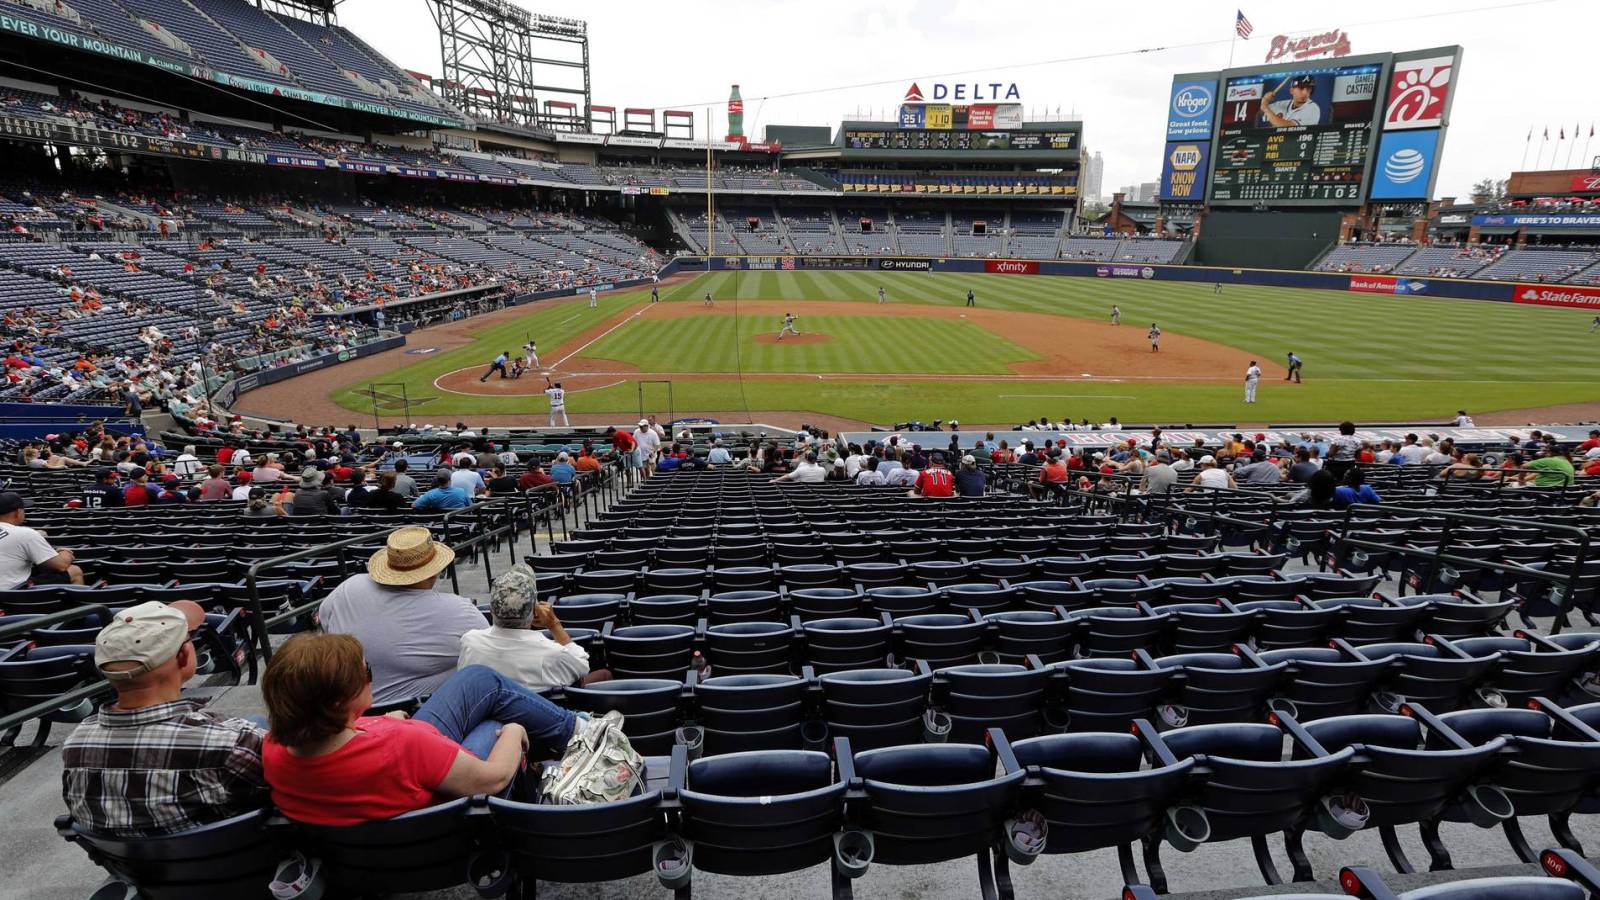 Going out with a thud: The Braves' historically awful farewell to Turner Field